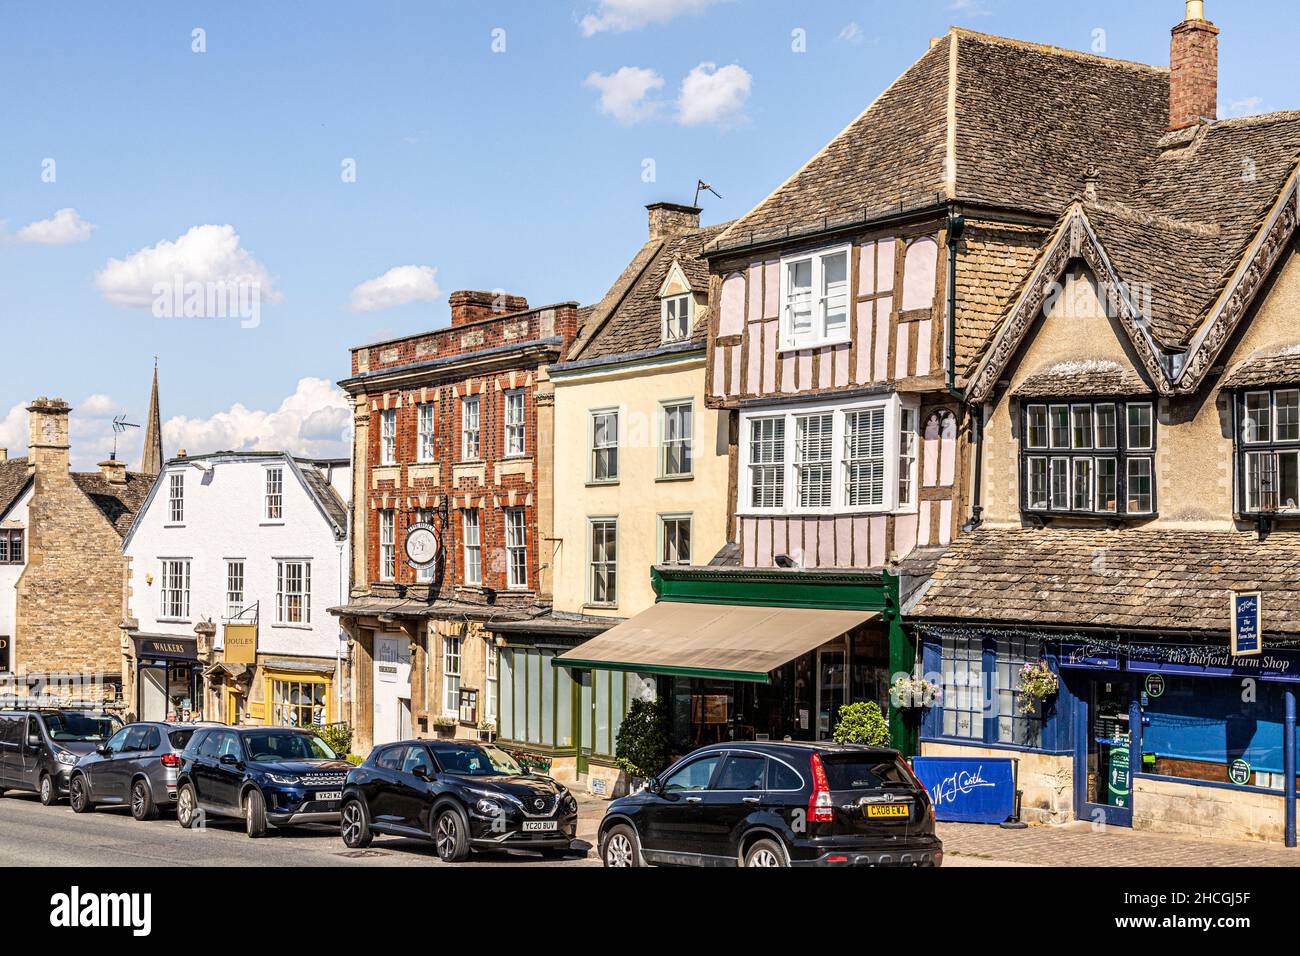 Buildings of different periods and architectural styles in the High Street of the Cotswold town of Burford, Oxfordshire UK Stock Photo